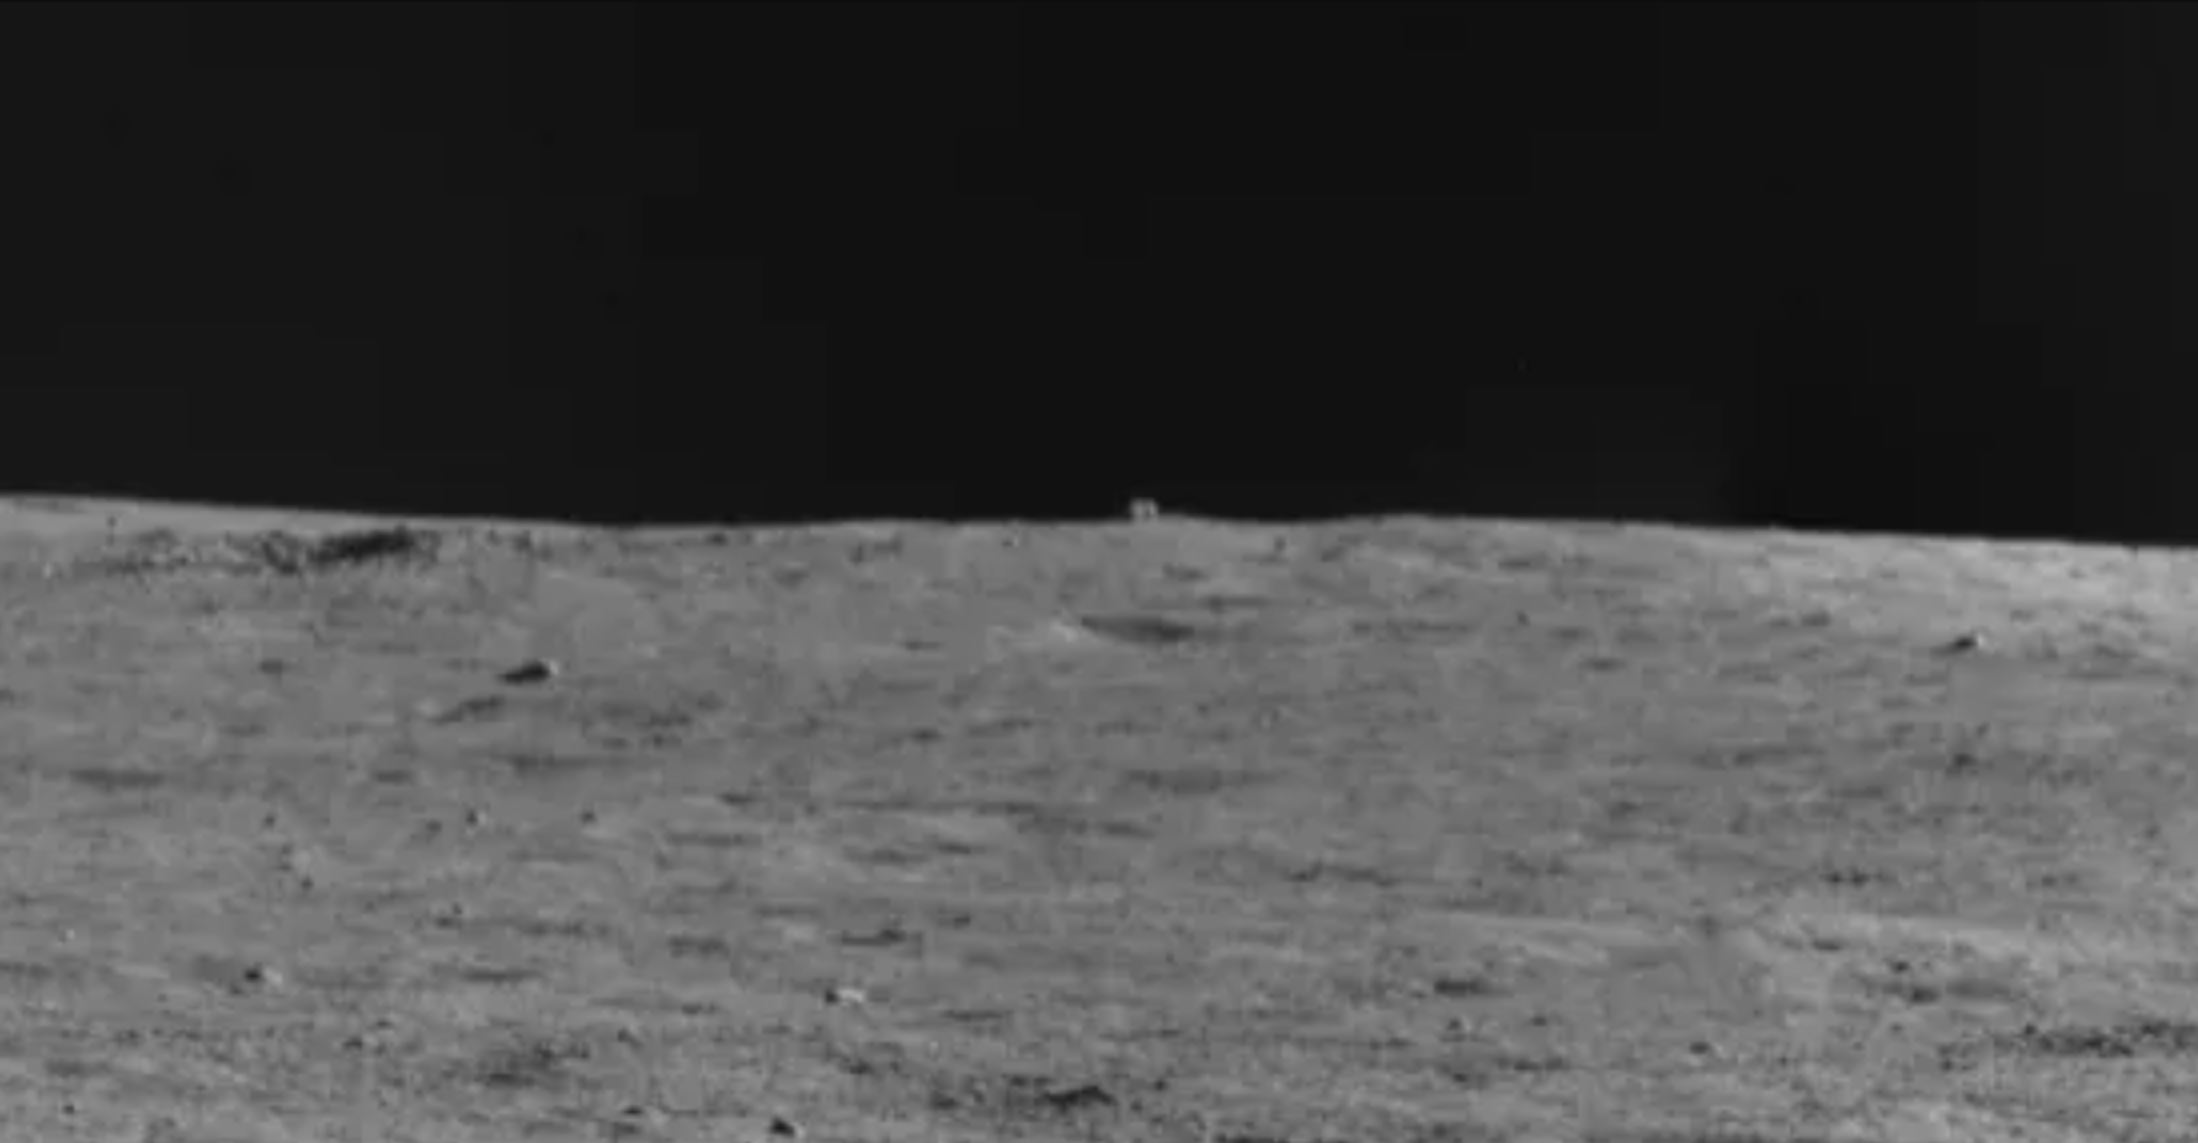 Blurry hut-like object on the surface of the far side of the moon